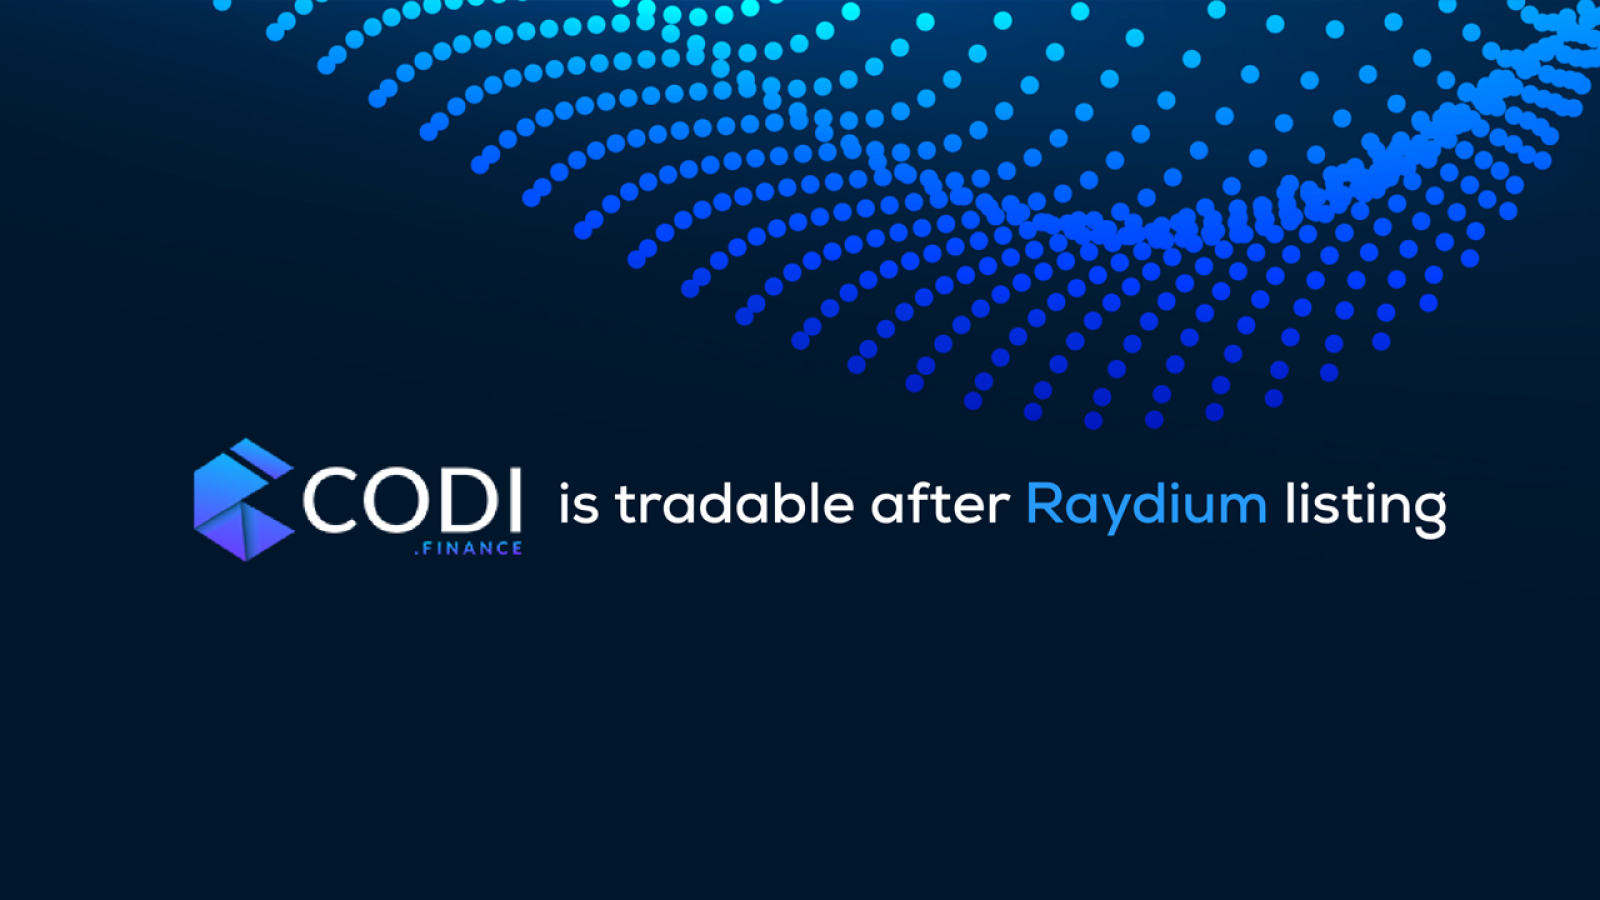 CODI Finance, the Newly Rallying DeFi Project, Is Listed on Raydium 